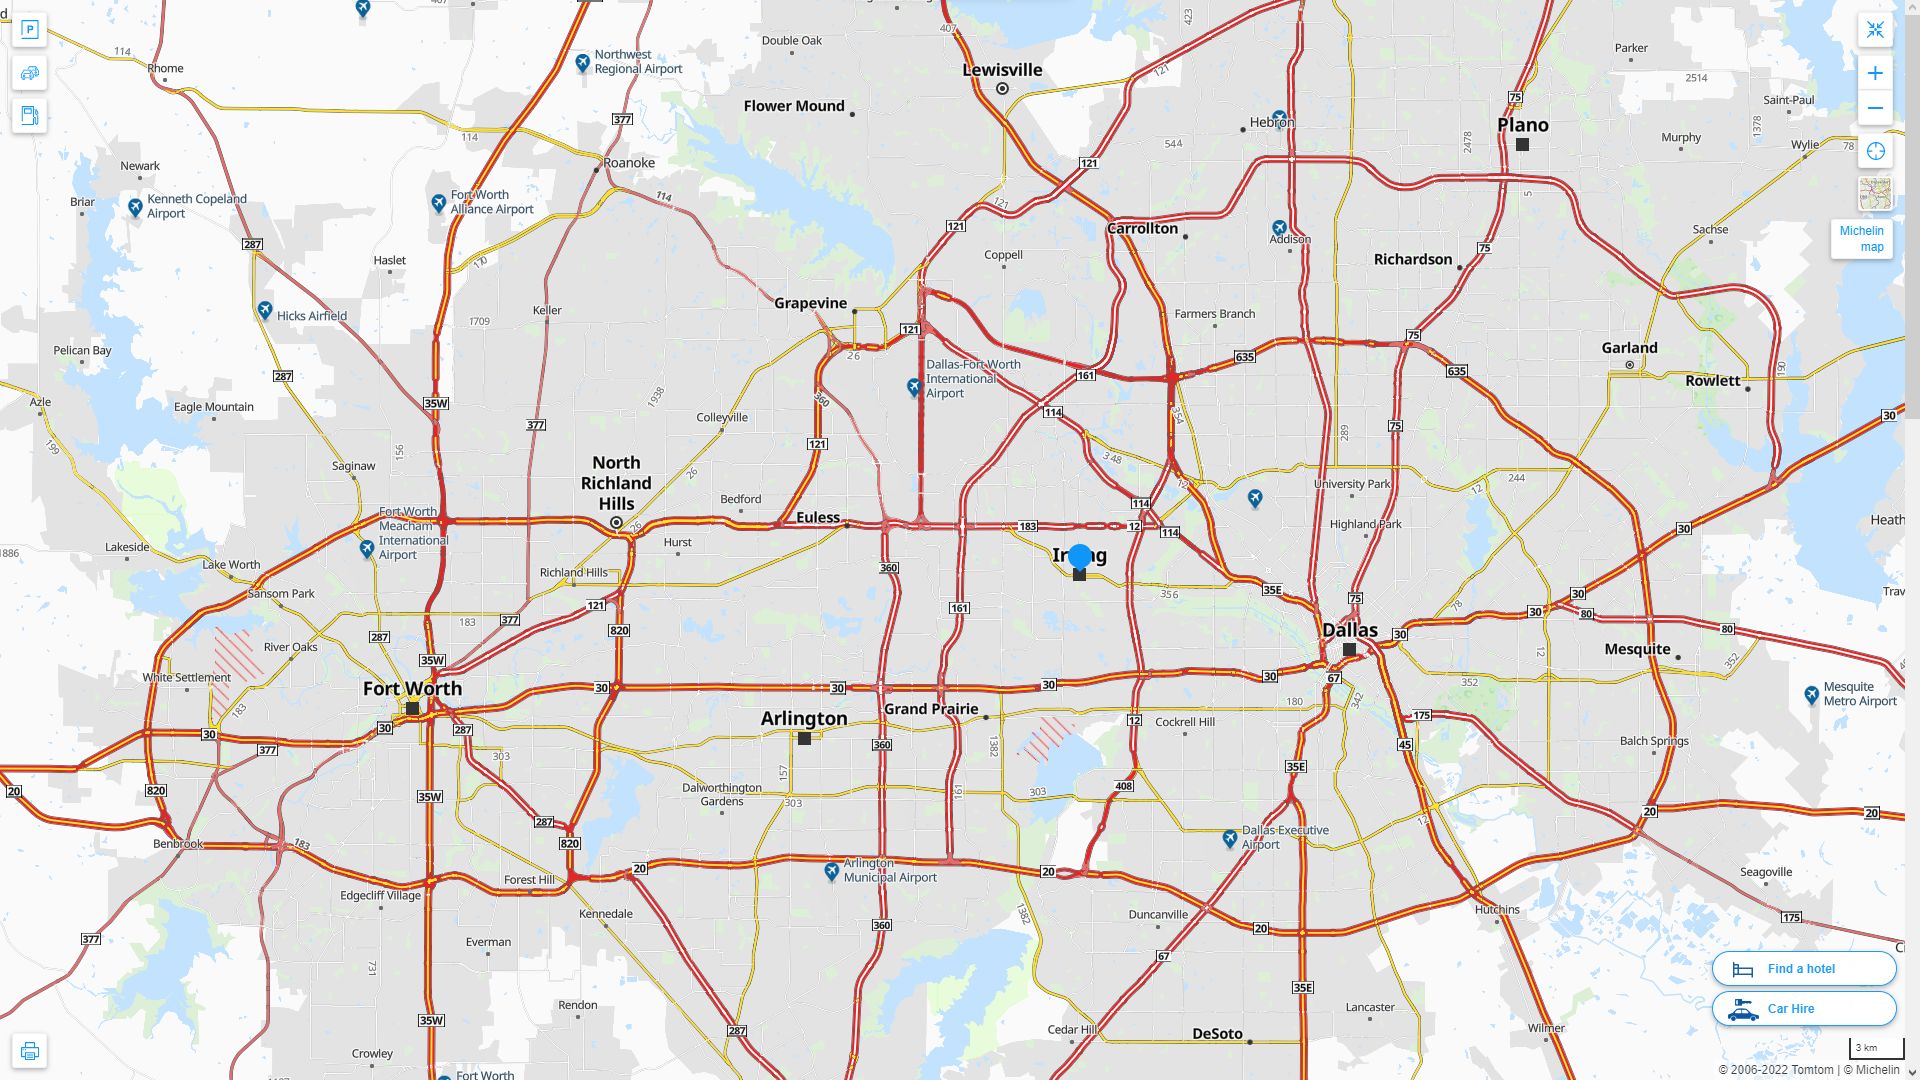 irving Texas Highway and Road Map